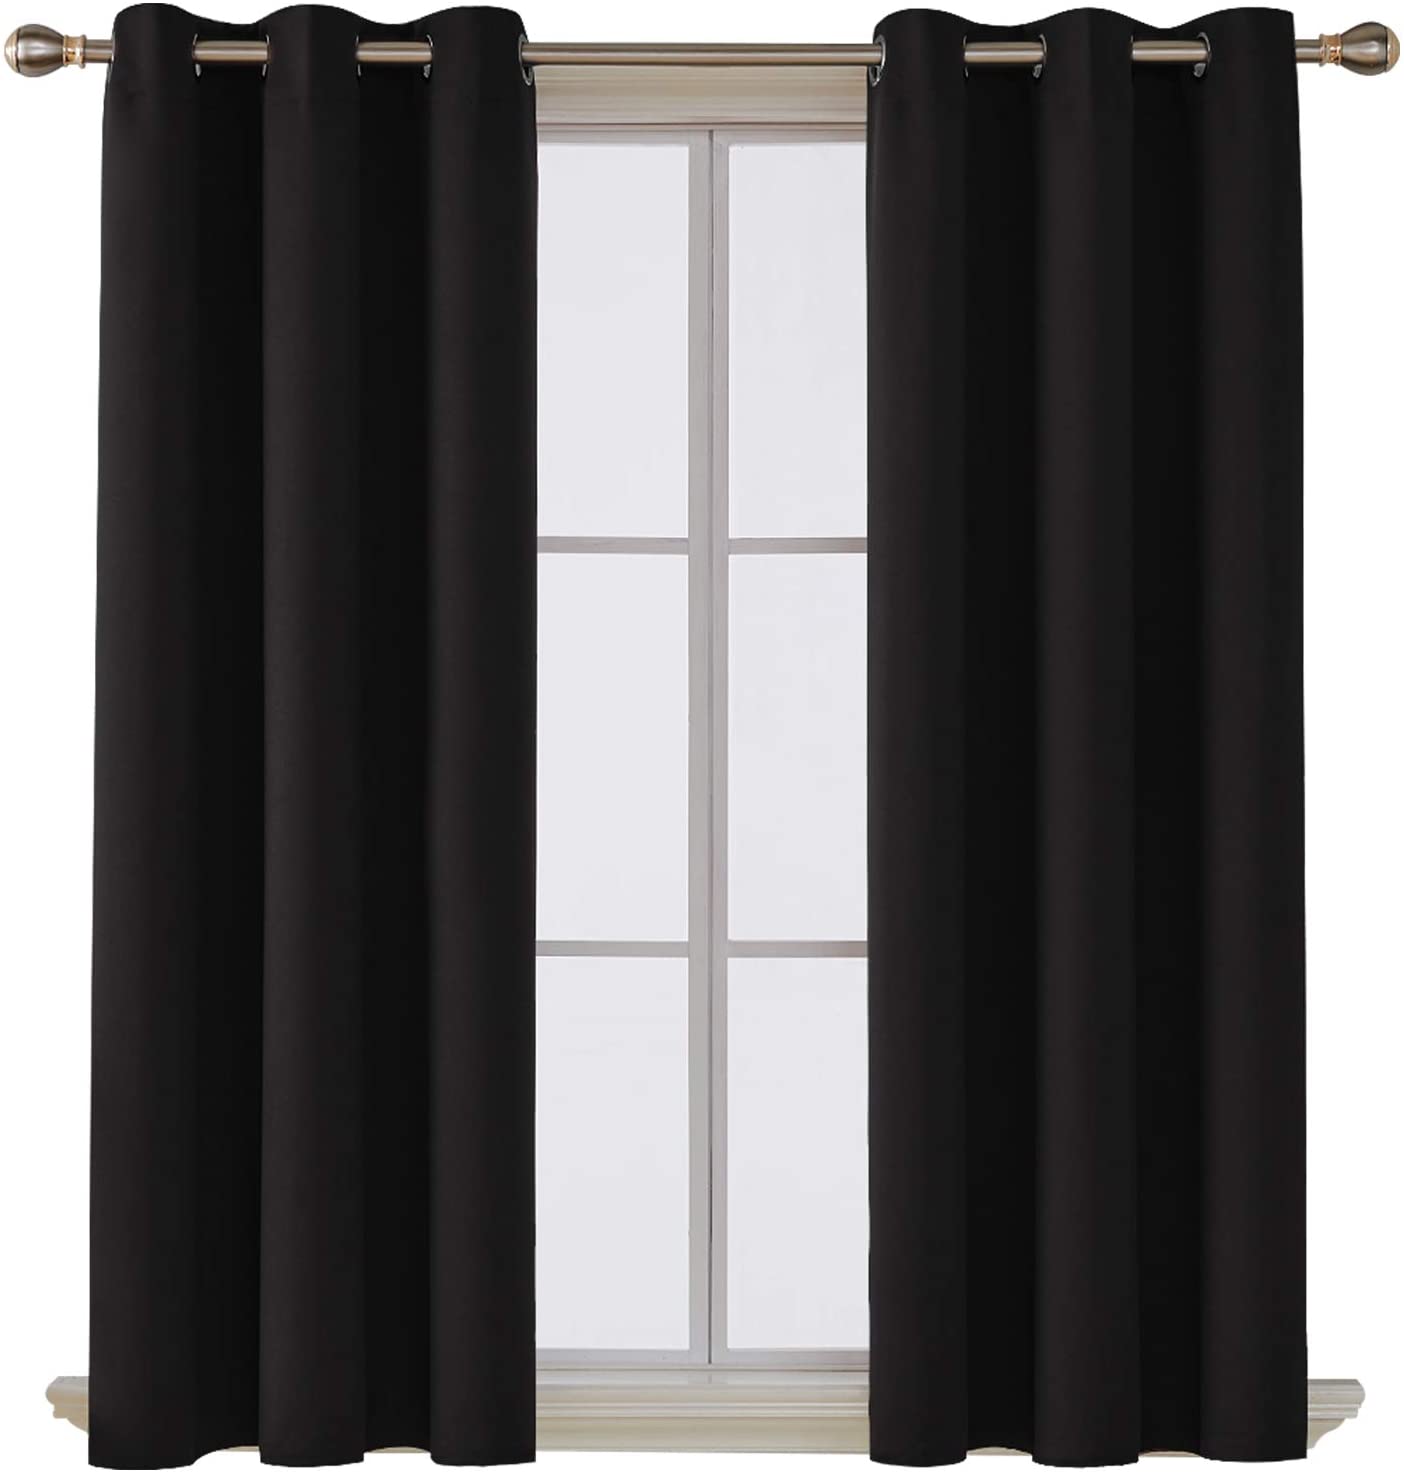 Deconovo Solid Blackout Curtains 1 Panel (4 colors) -$6.11 + Free Shipping w/ Prime